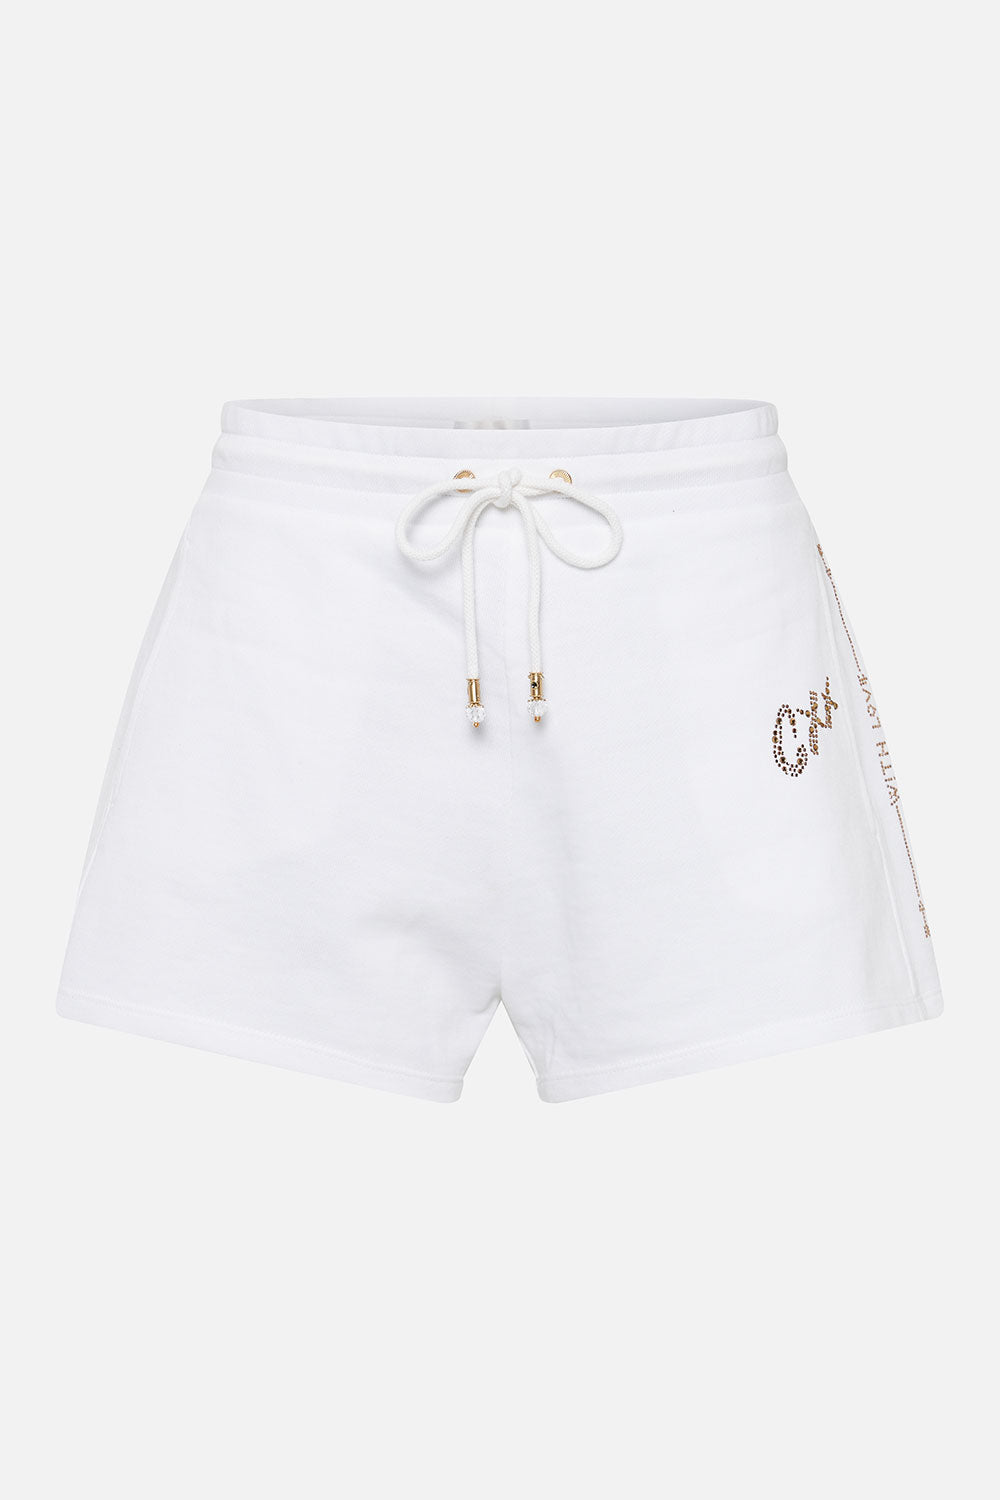 TERRY SHORT WITH CONTRAST STRIPE LOGO CAPSULE - SOLID WHITE